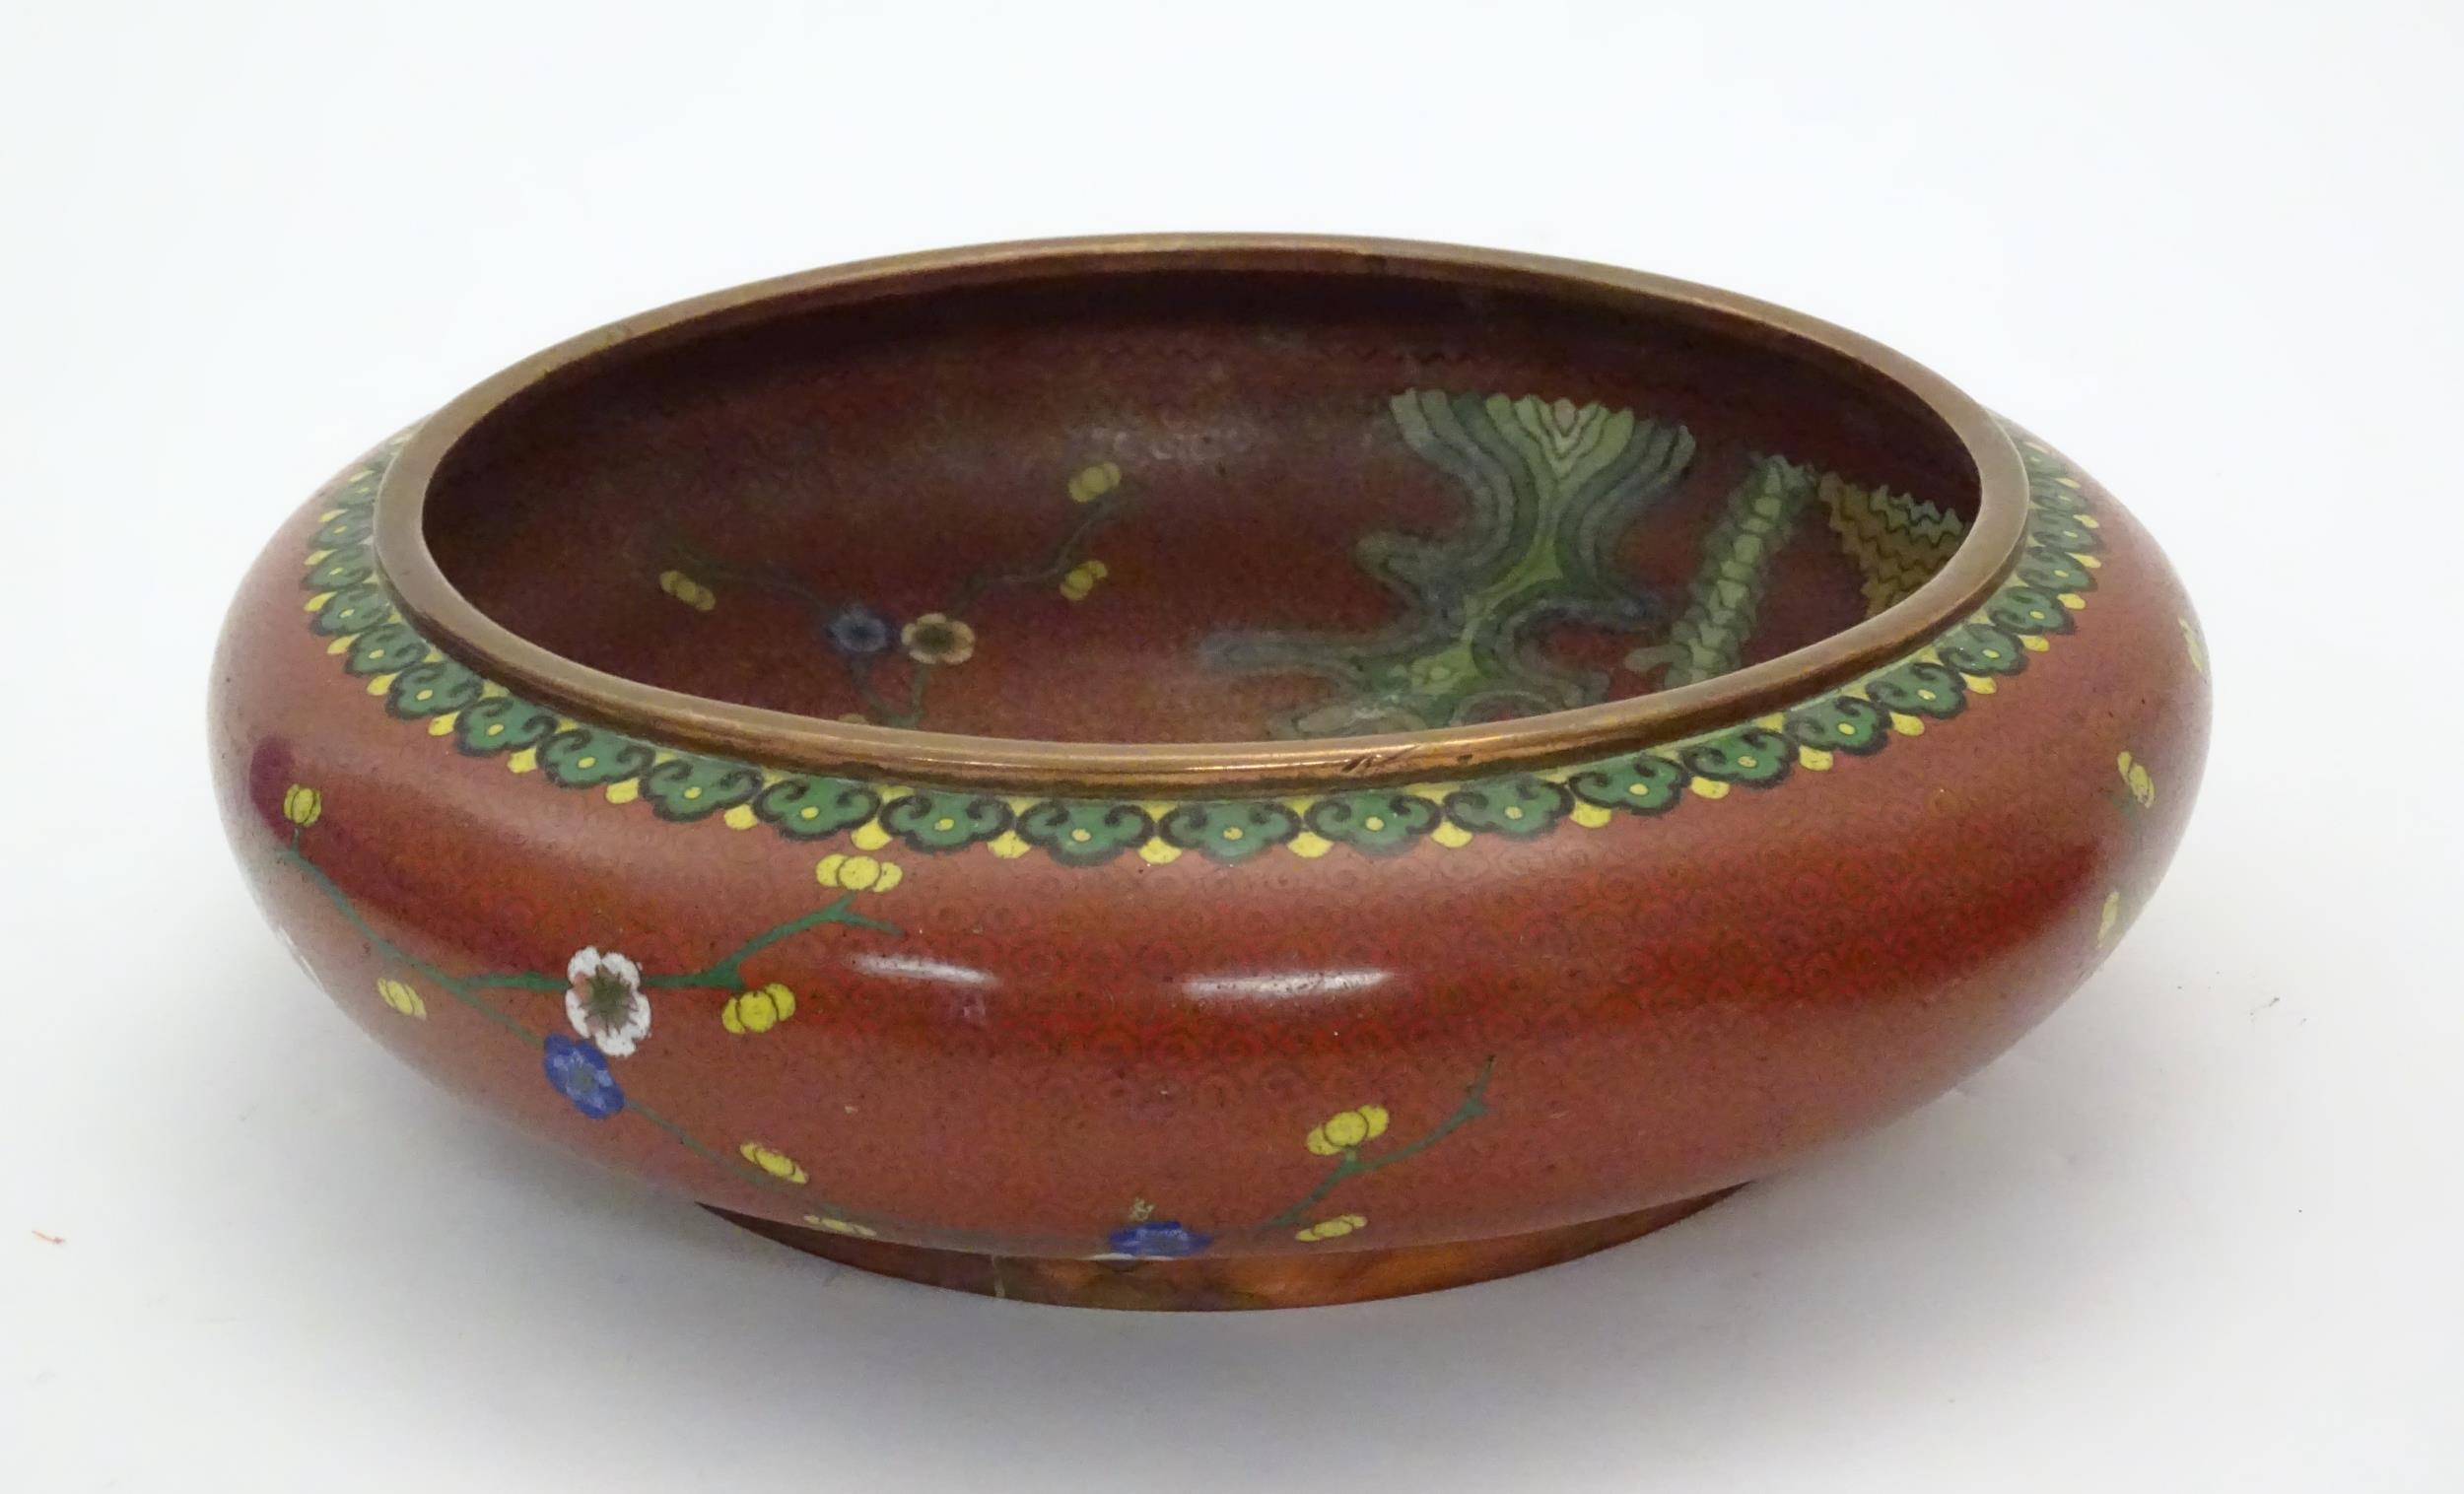 A Chinese cloisonne shallow bowl with floral and foliate detail. Approx. 3 1/4" x 10" diameter - Image 5 of 6